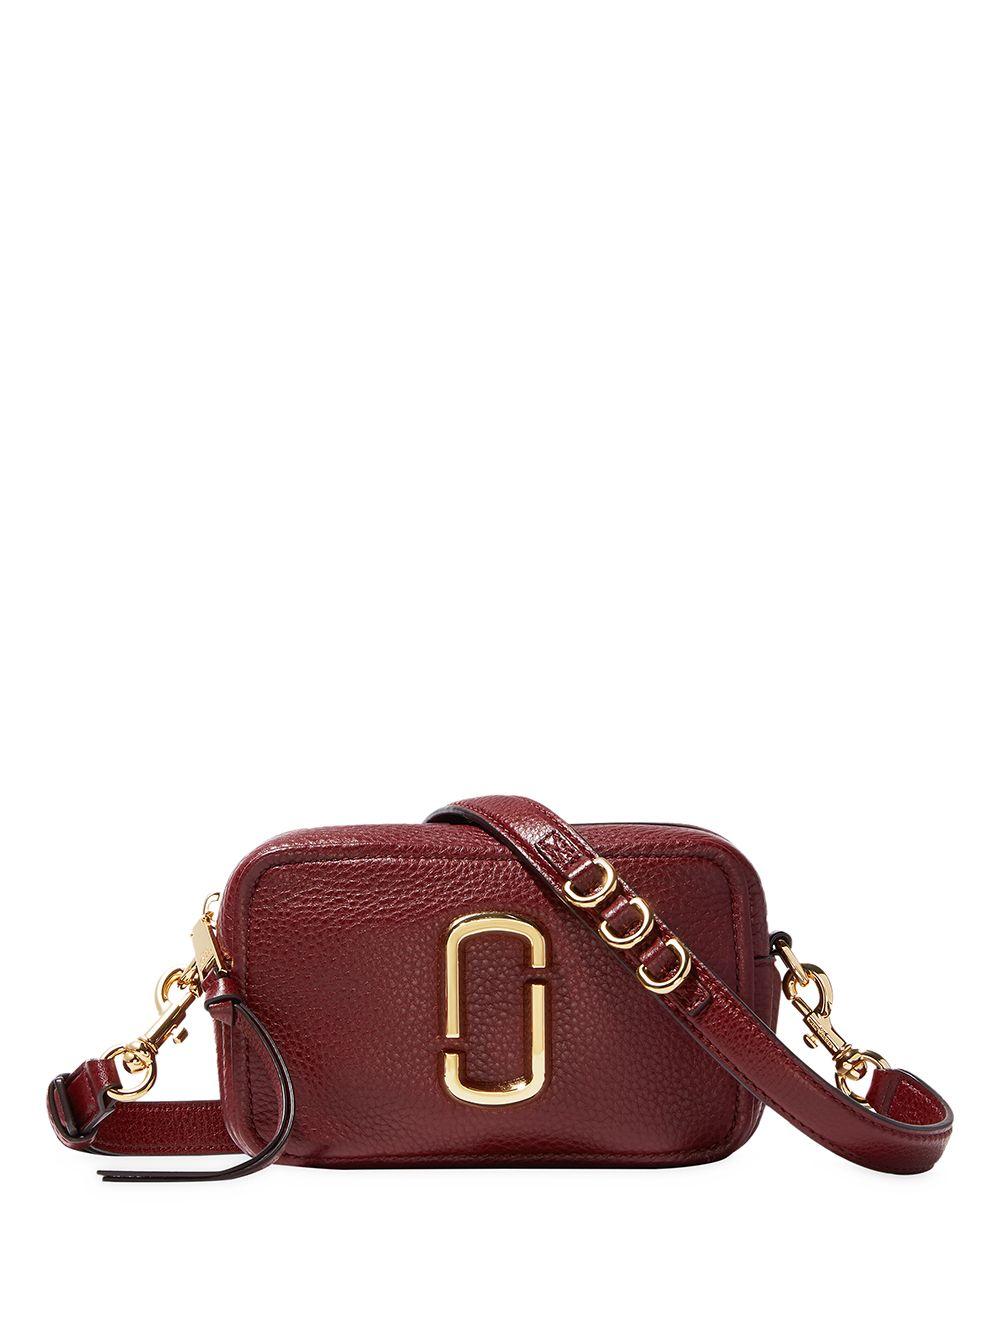 Marc Jacobs Leather The Softshot 17 Crossbody Bag in Red - Lyst